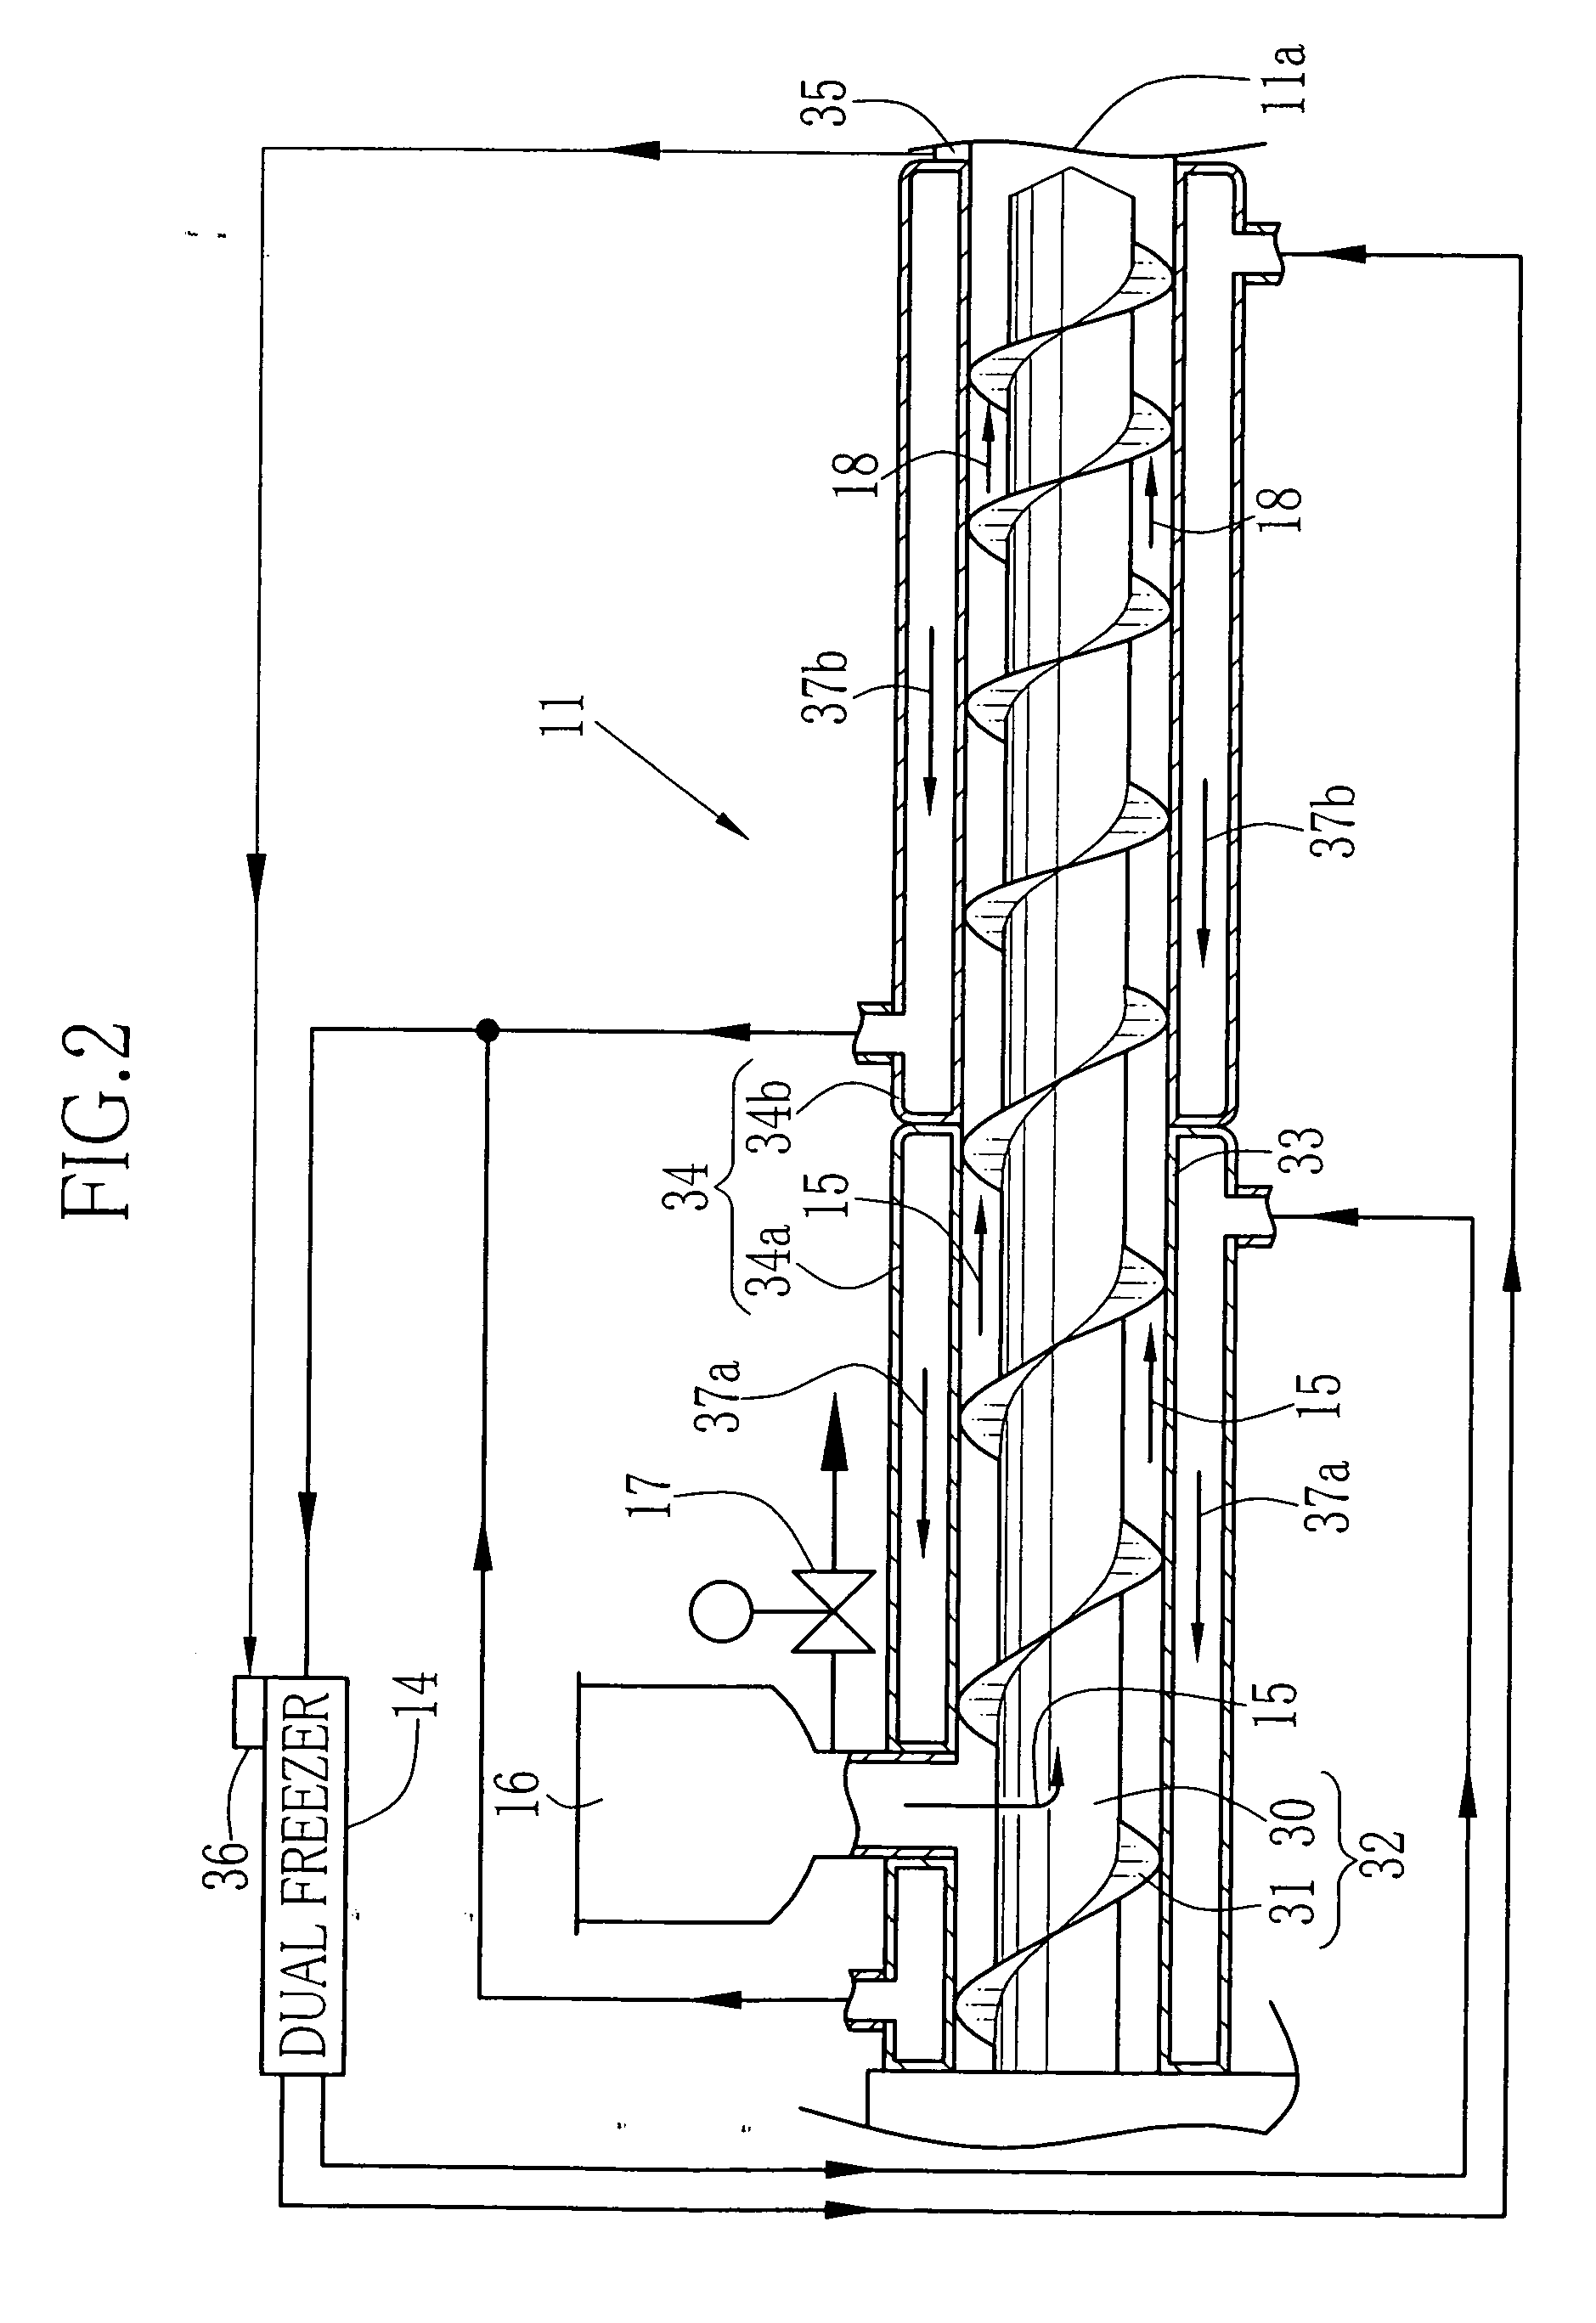 Apparatus and method of producing dope